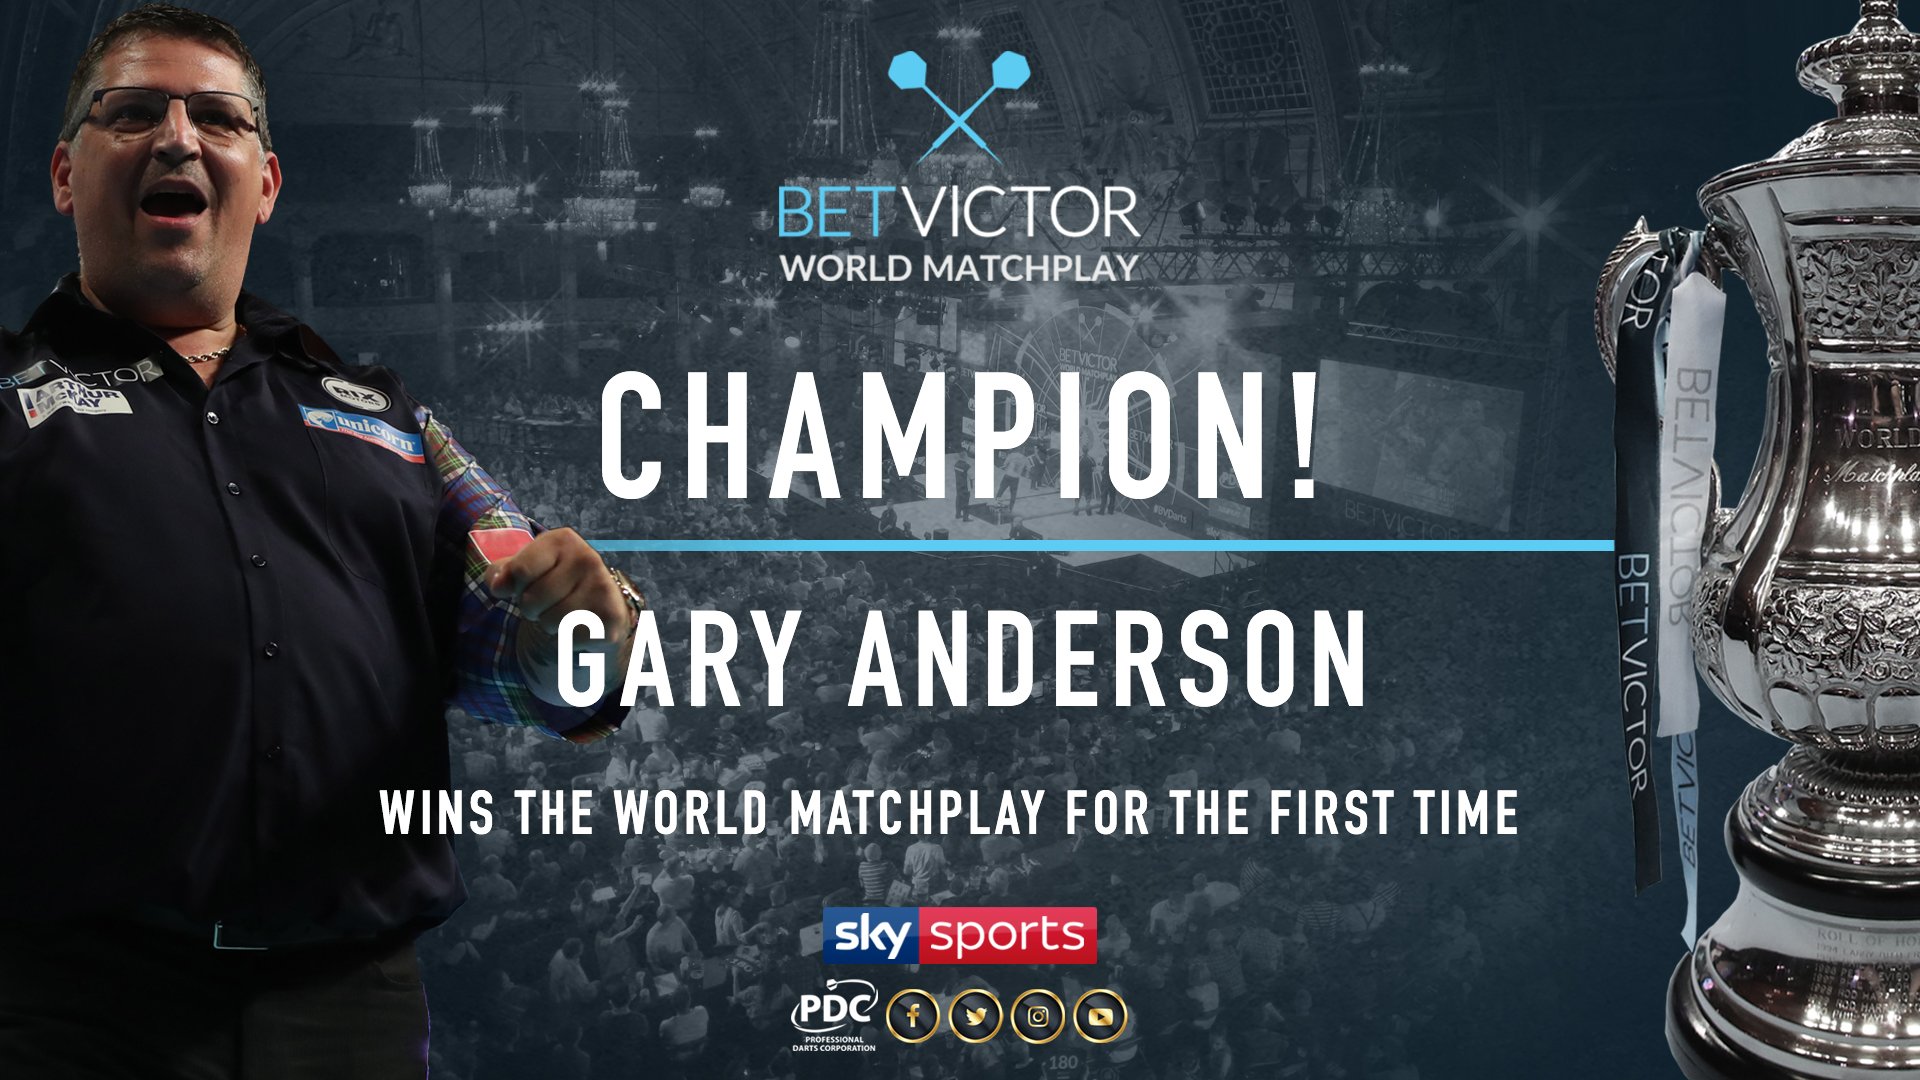 PDC Darts on Twitter: ANDERSON WINS THE 2018 BETVICTOR WORLD MATCHPLAY! The Scot comes out on top against Mensur Suljovic in a match will live in the memory! https://t.co/t3cy37nAhW" /